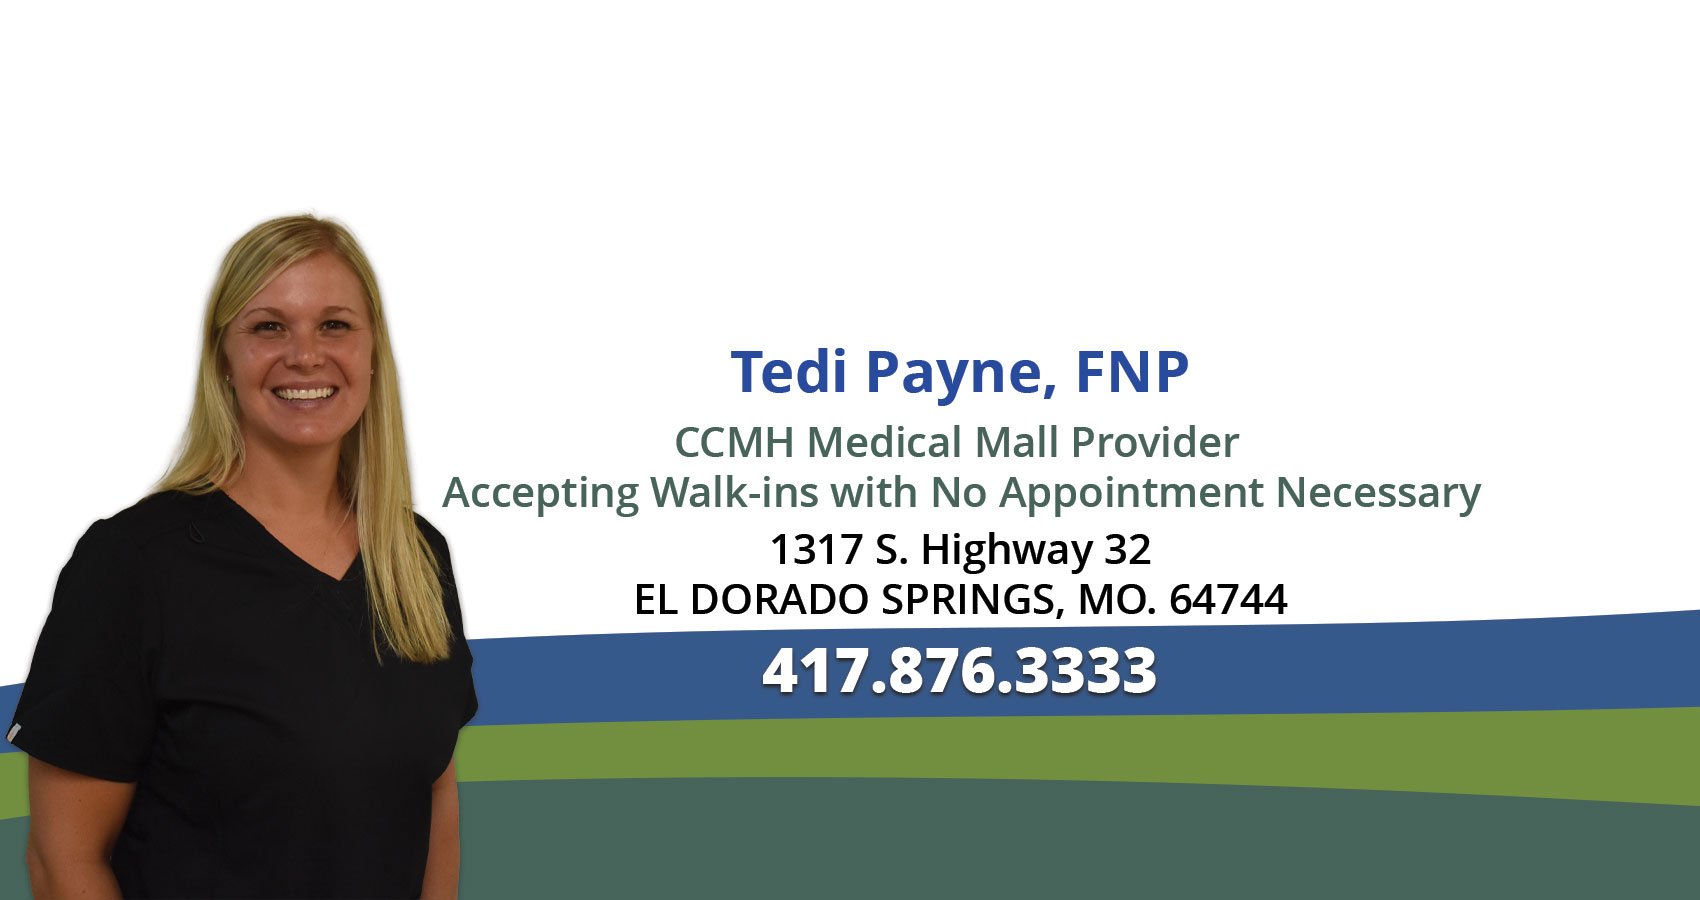 Banner picture of Tedi Payne, FNP, smiling and a faded background picture of water, trees, and rocks. Banner says:

Welcome
TEDI PAYNE, FNP
Cedar County Memorial Hospital is pleased to announce that Tedi Payne, FNP is joining CCMH as the facility continues it's upward growth strategy. Tedi brings nearly 10 years of experience to the provider group as she joins Andrew Wyant, M.D., Craig Wamsley, M.D. and Chandler Curtis, PA-C at the CCMH Medical Mall at 1317 South Hwy in El Dorado Springs.
(((Learn More)))